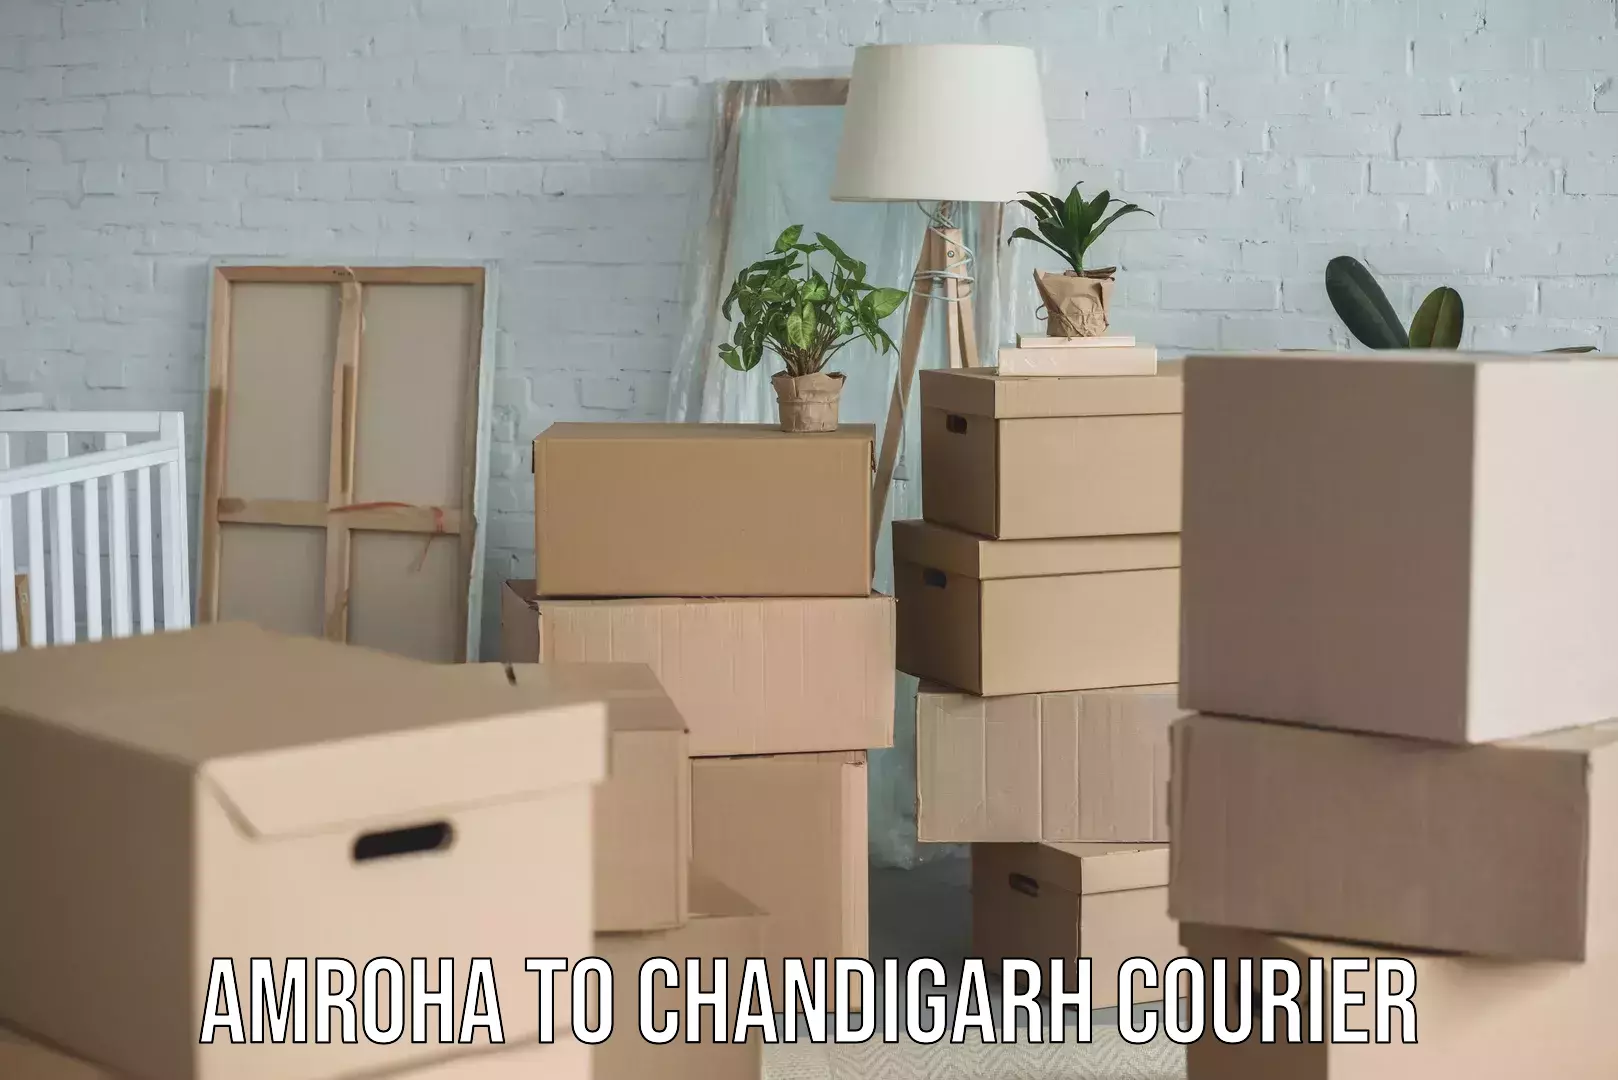 Express delivery solutions Amroha to Chandigarh